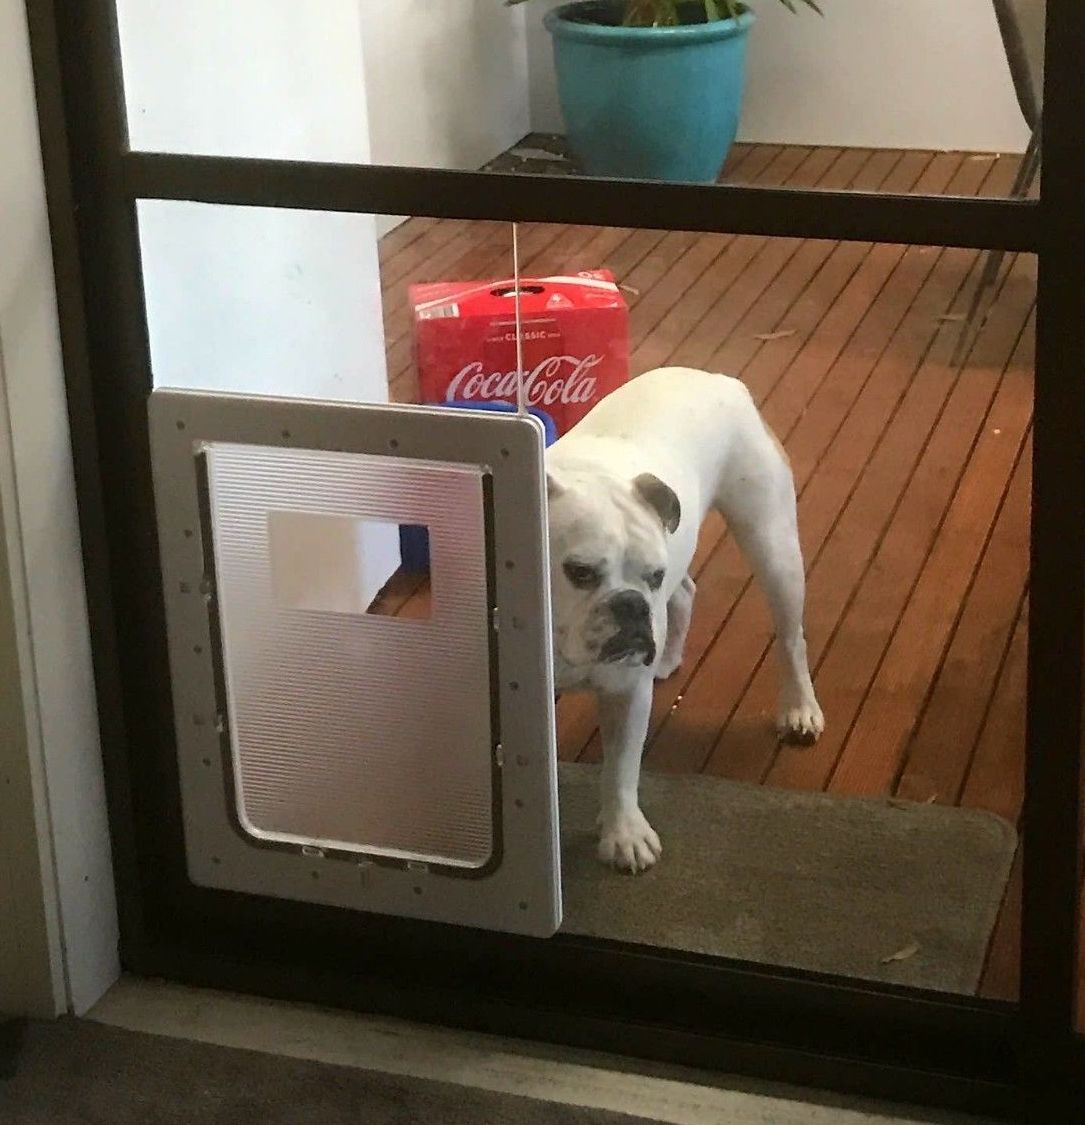 A pet door with a dog behind it